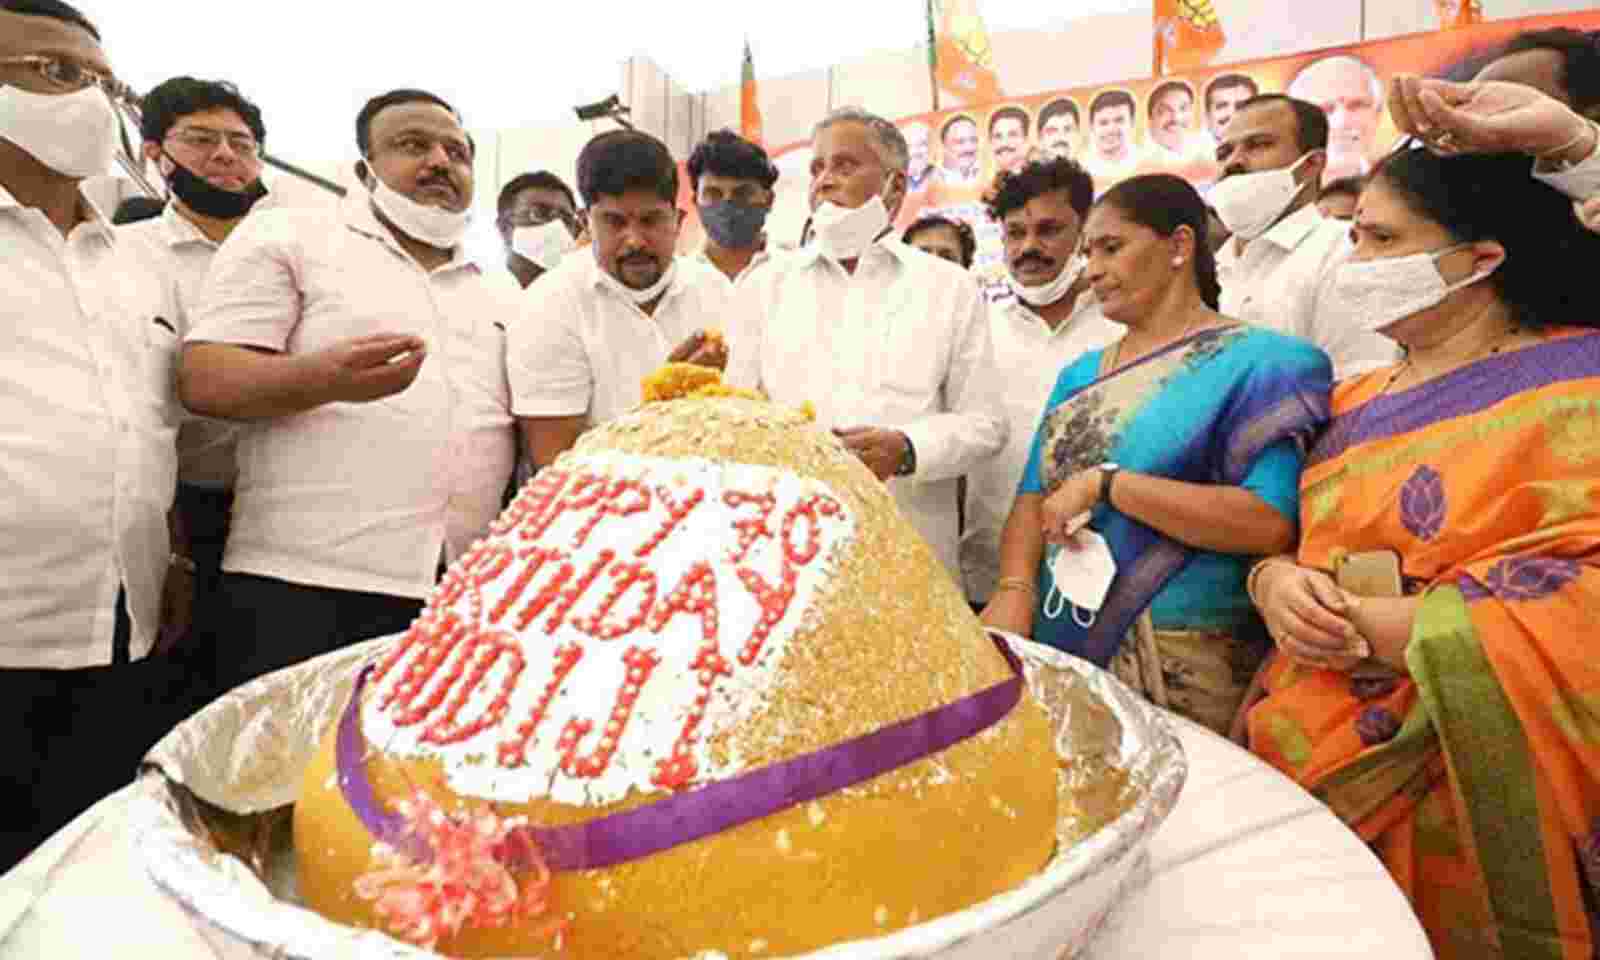 An Indian baker puts the finishing touches on a cake for Gujarat... News  Photo - Getty Images